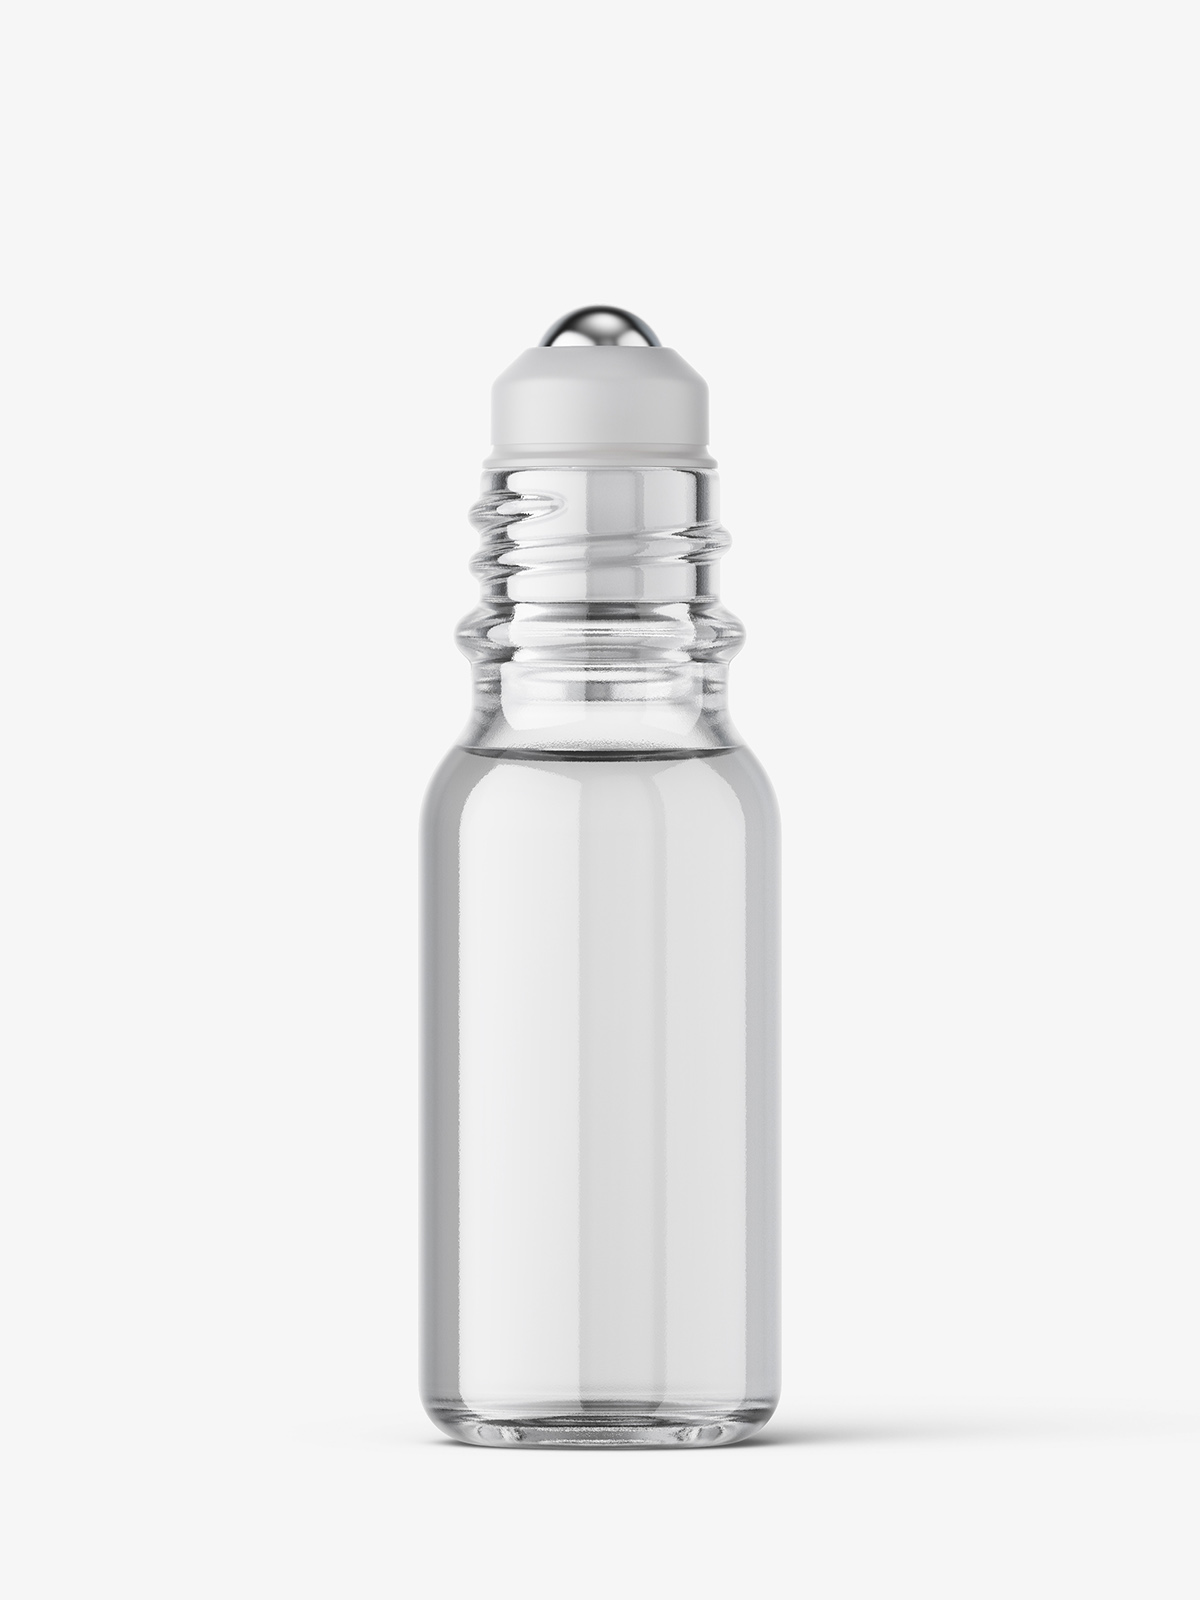 Small roll-on bottle mockup / clear - Smarty Mockups